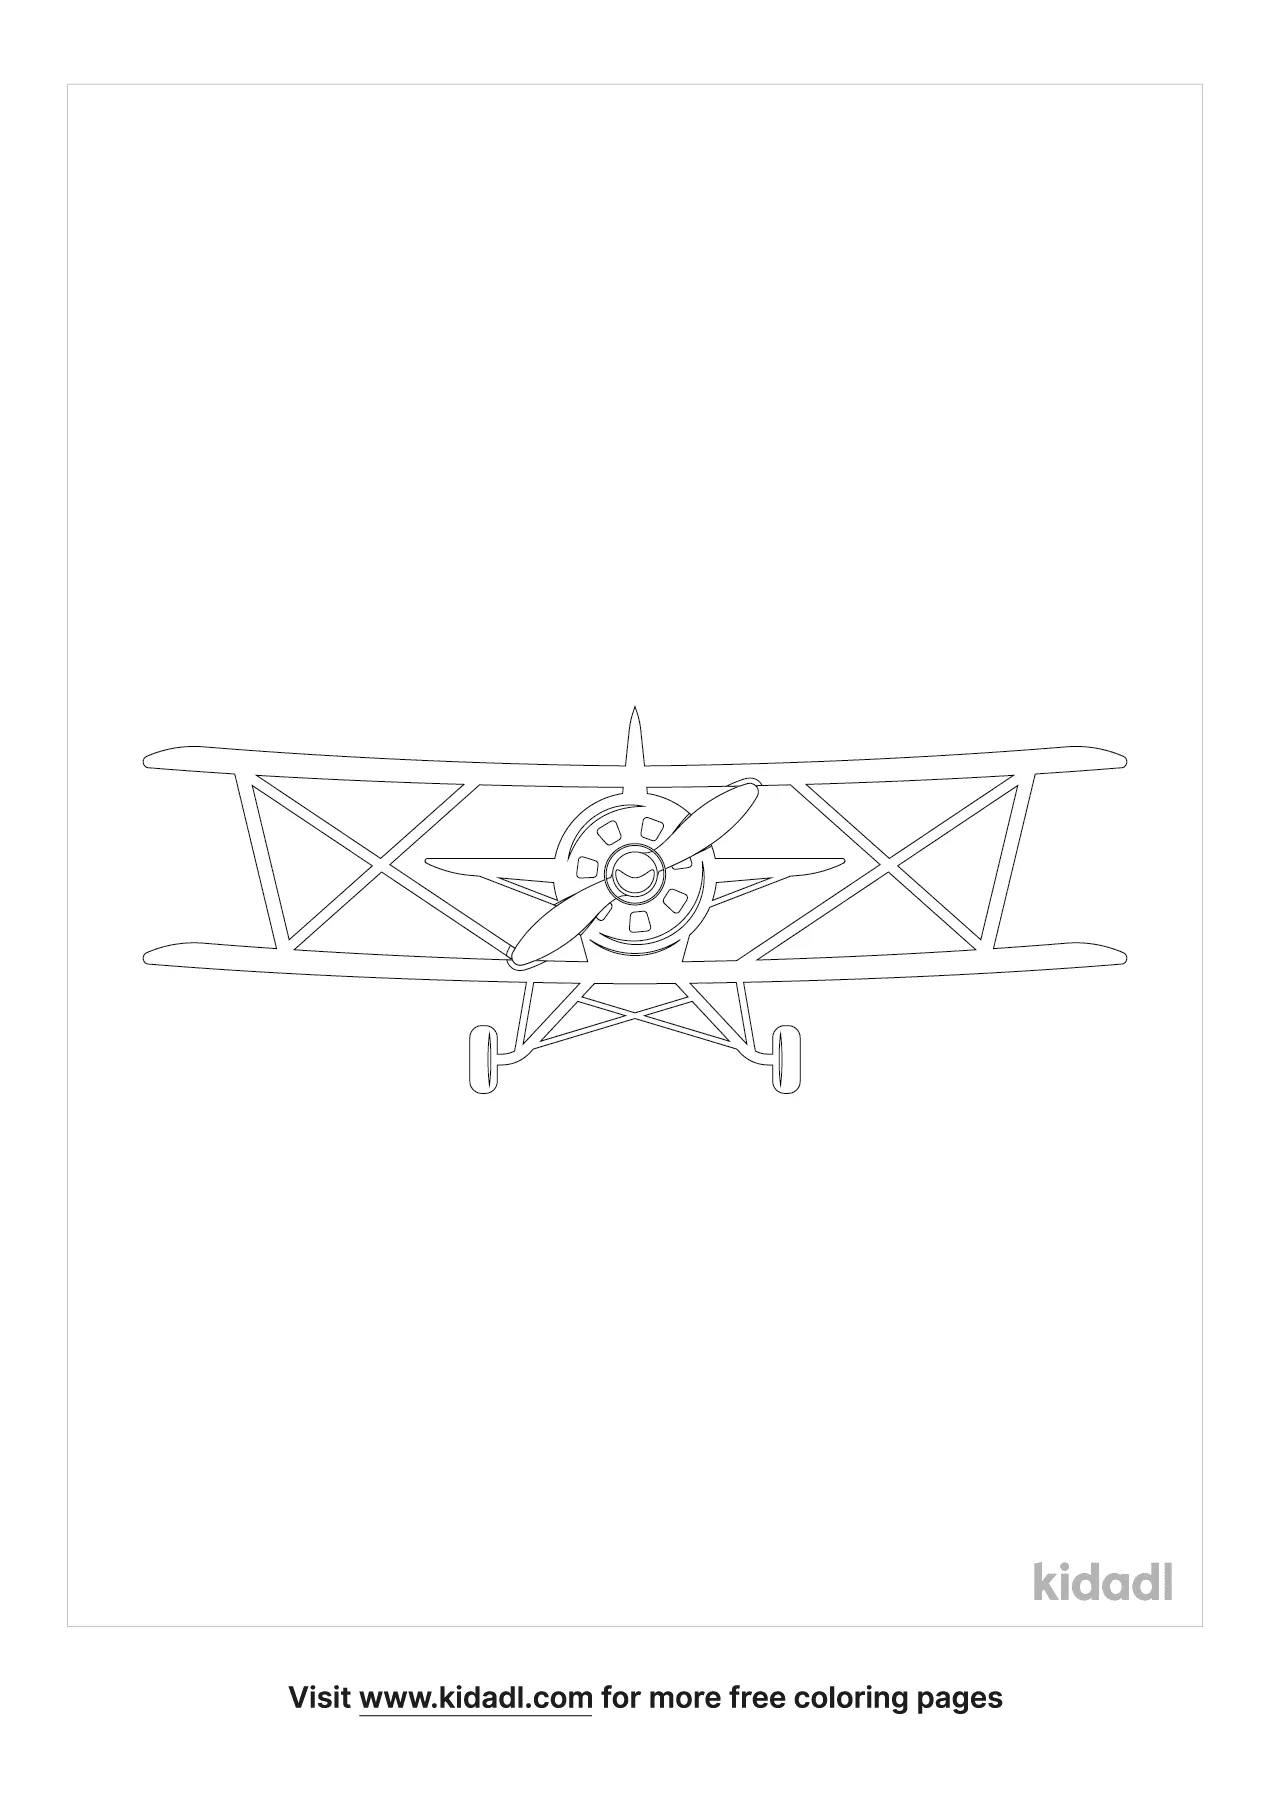 Wright Brothers Plane Coloring Page